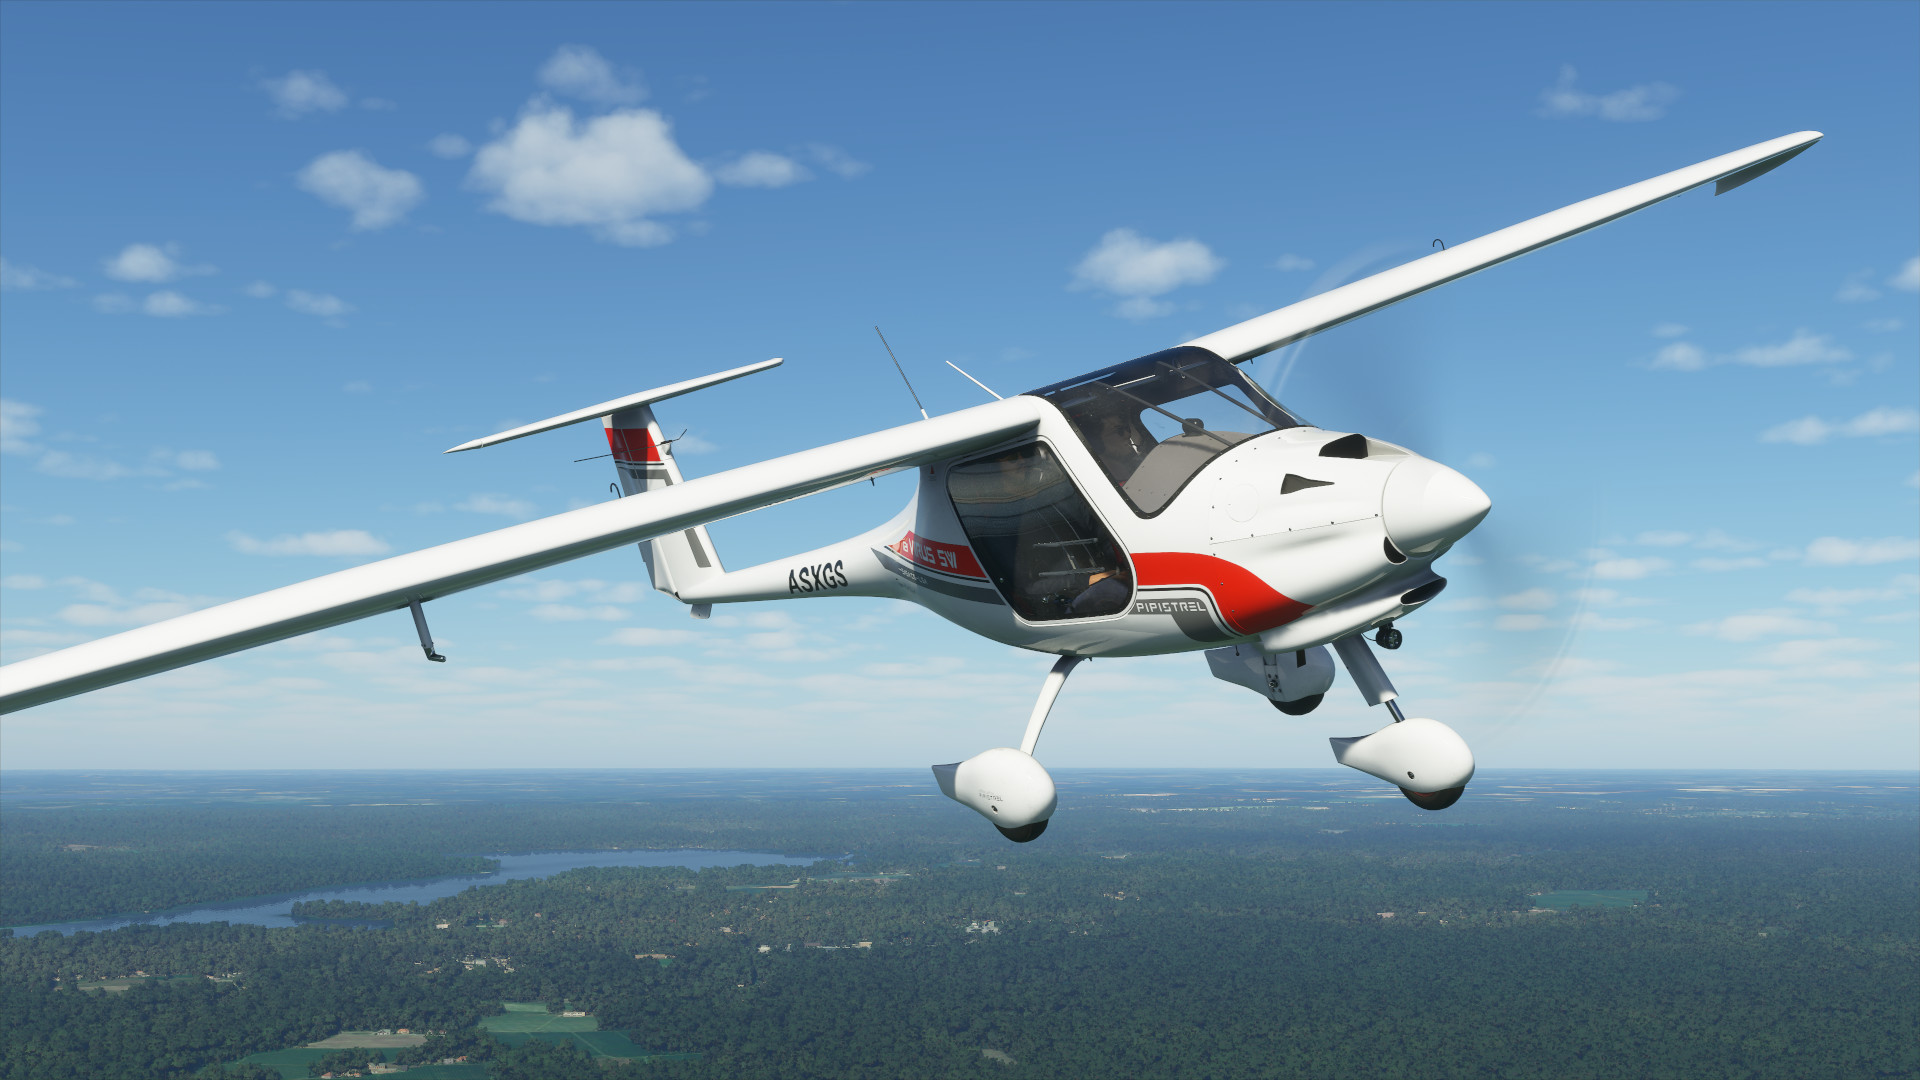 Microsoft Flight Simulator’s First Patch Coming Next Week; Preliminary Notes Released